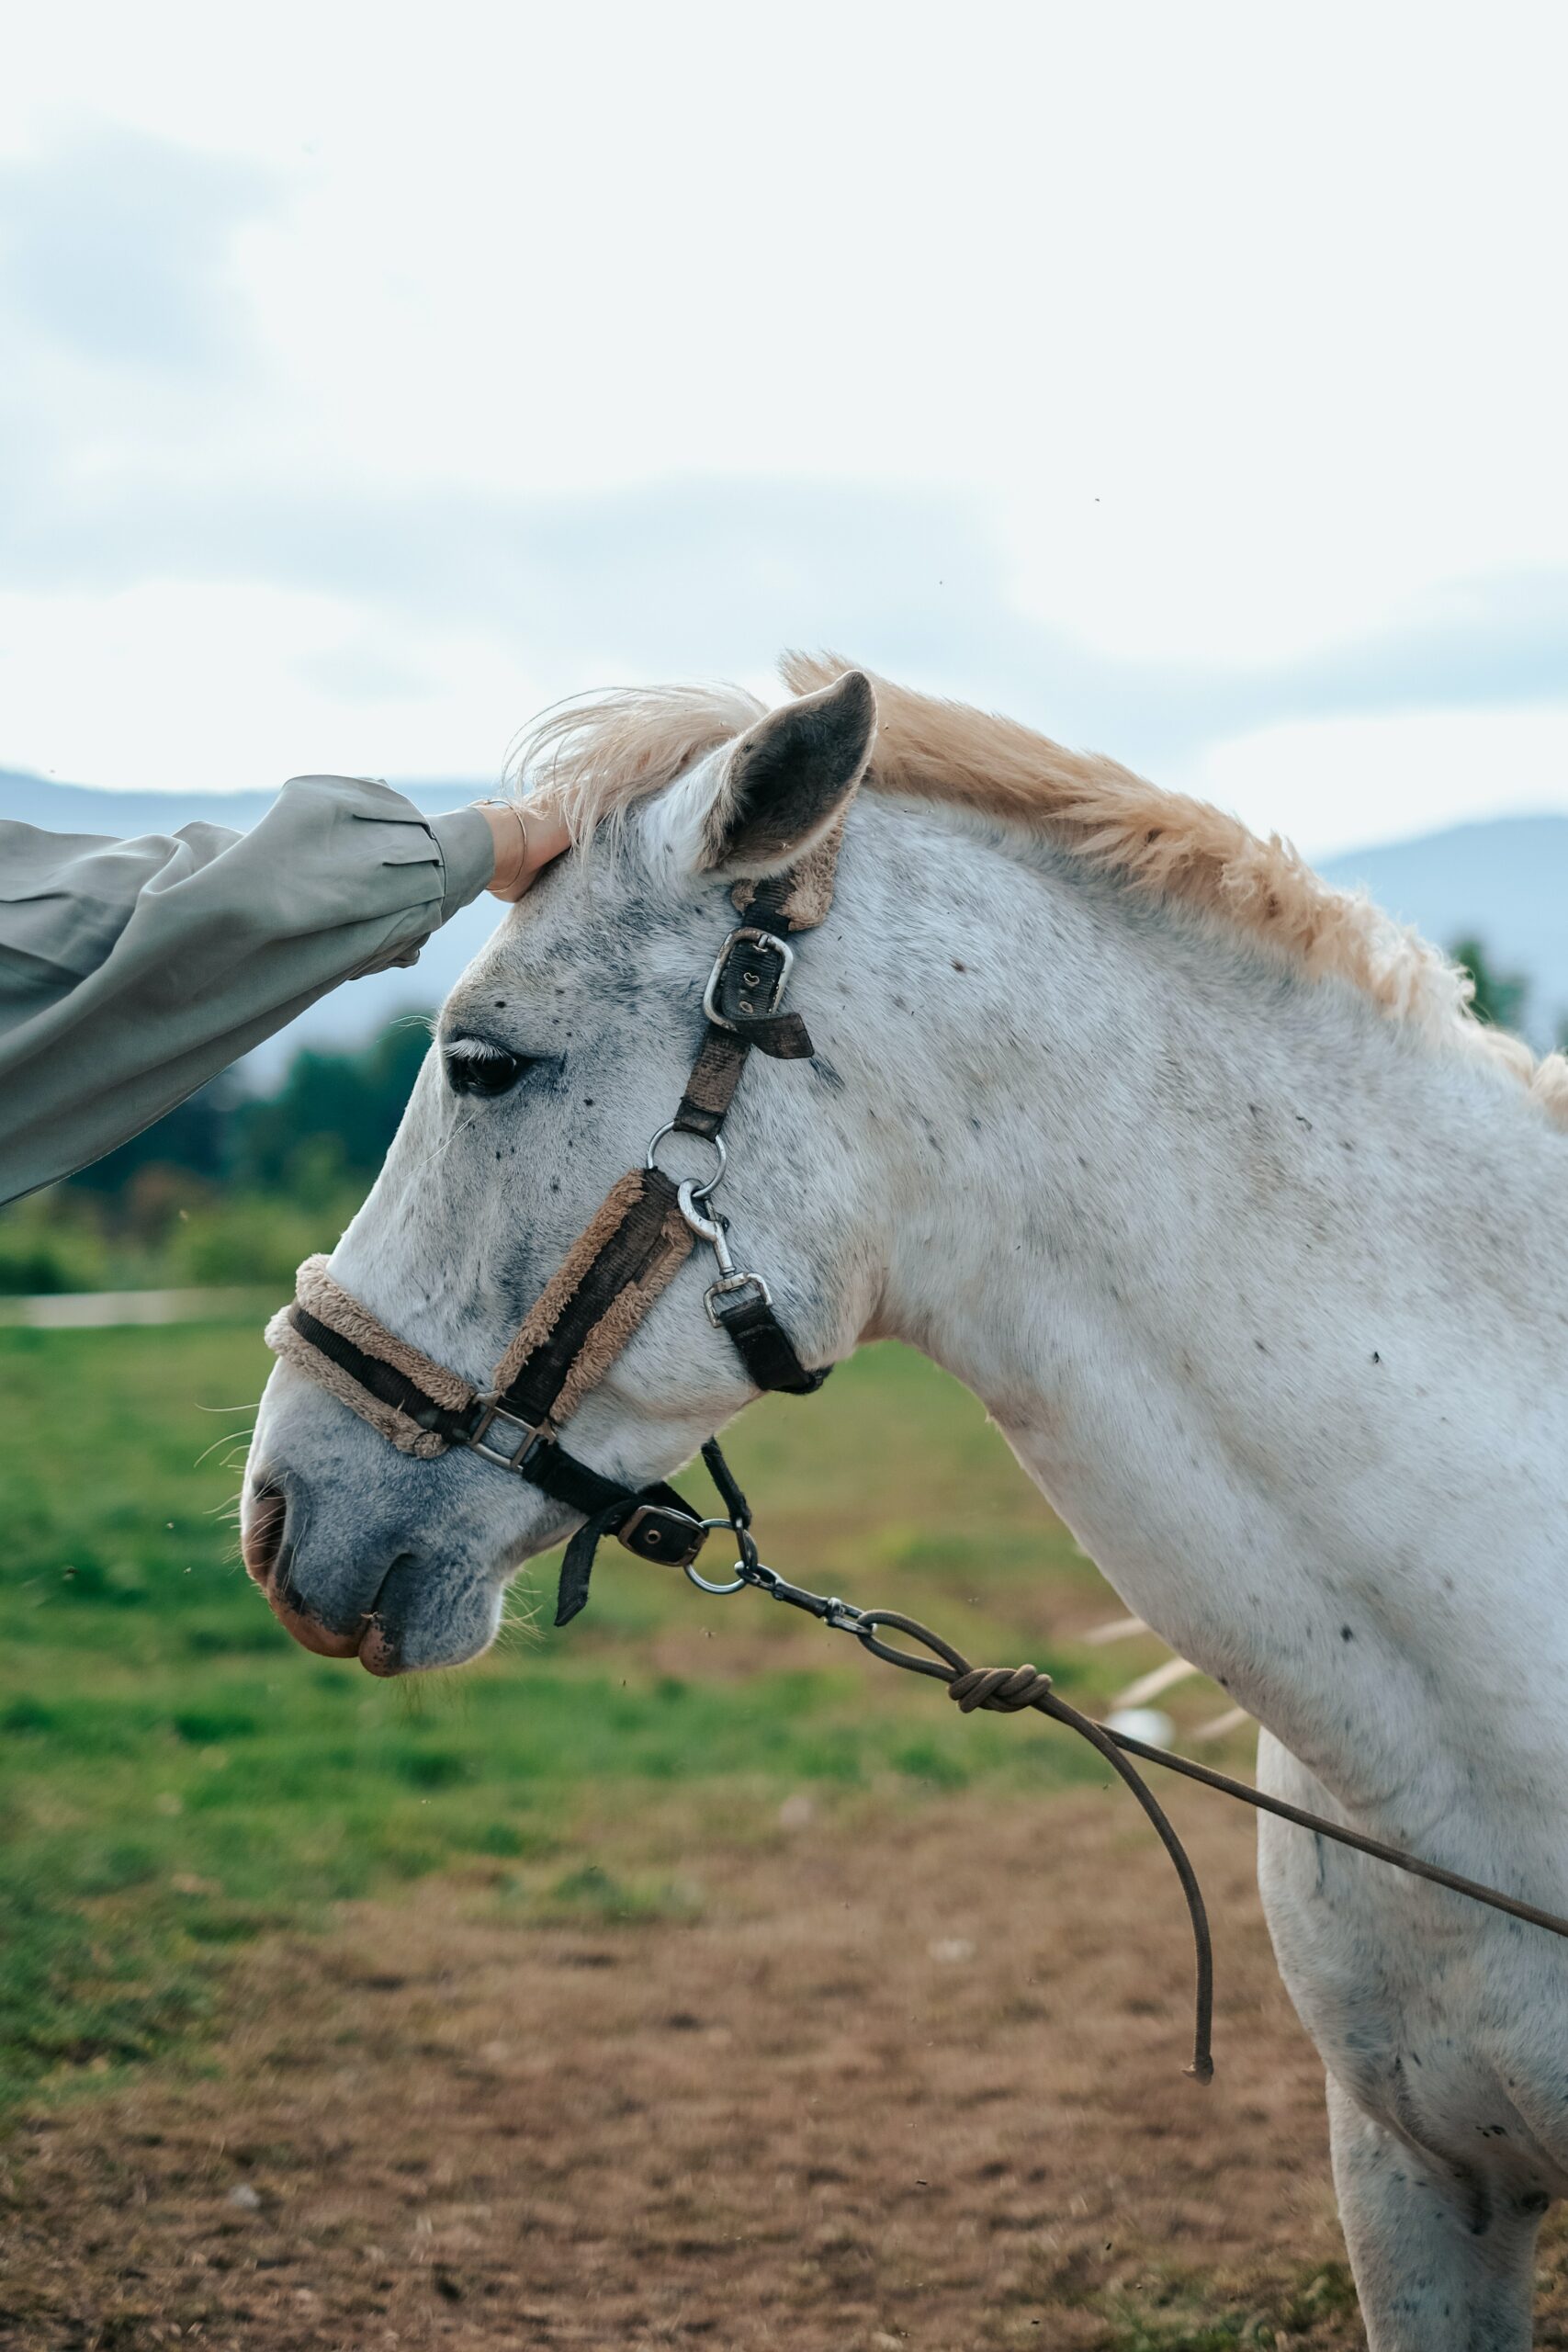 What are the signs of gas Colic in Horses?